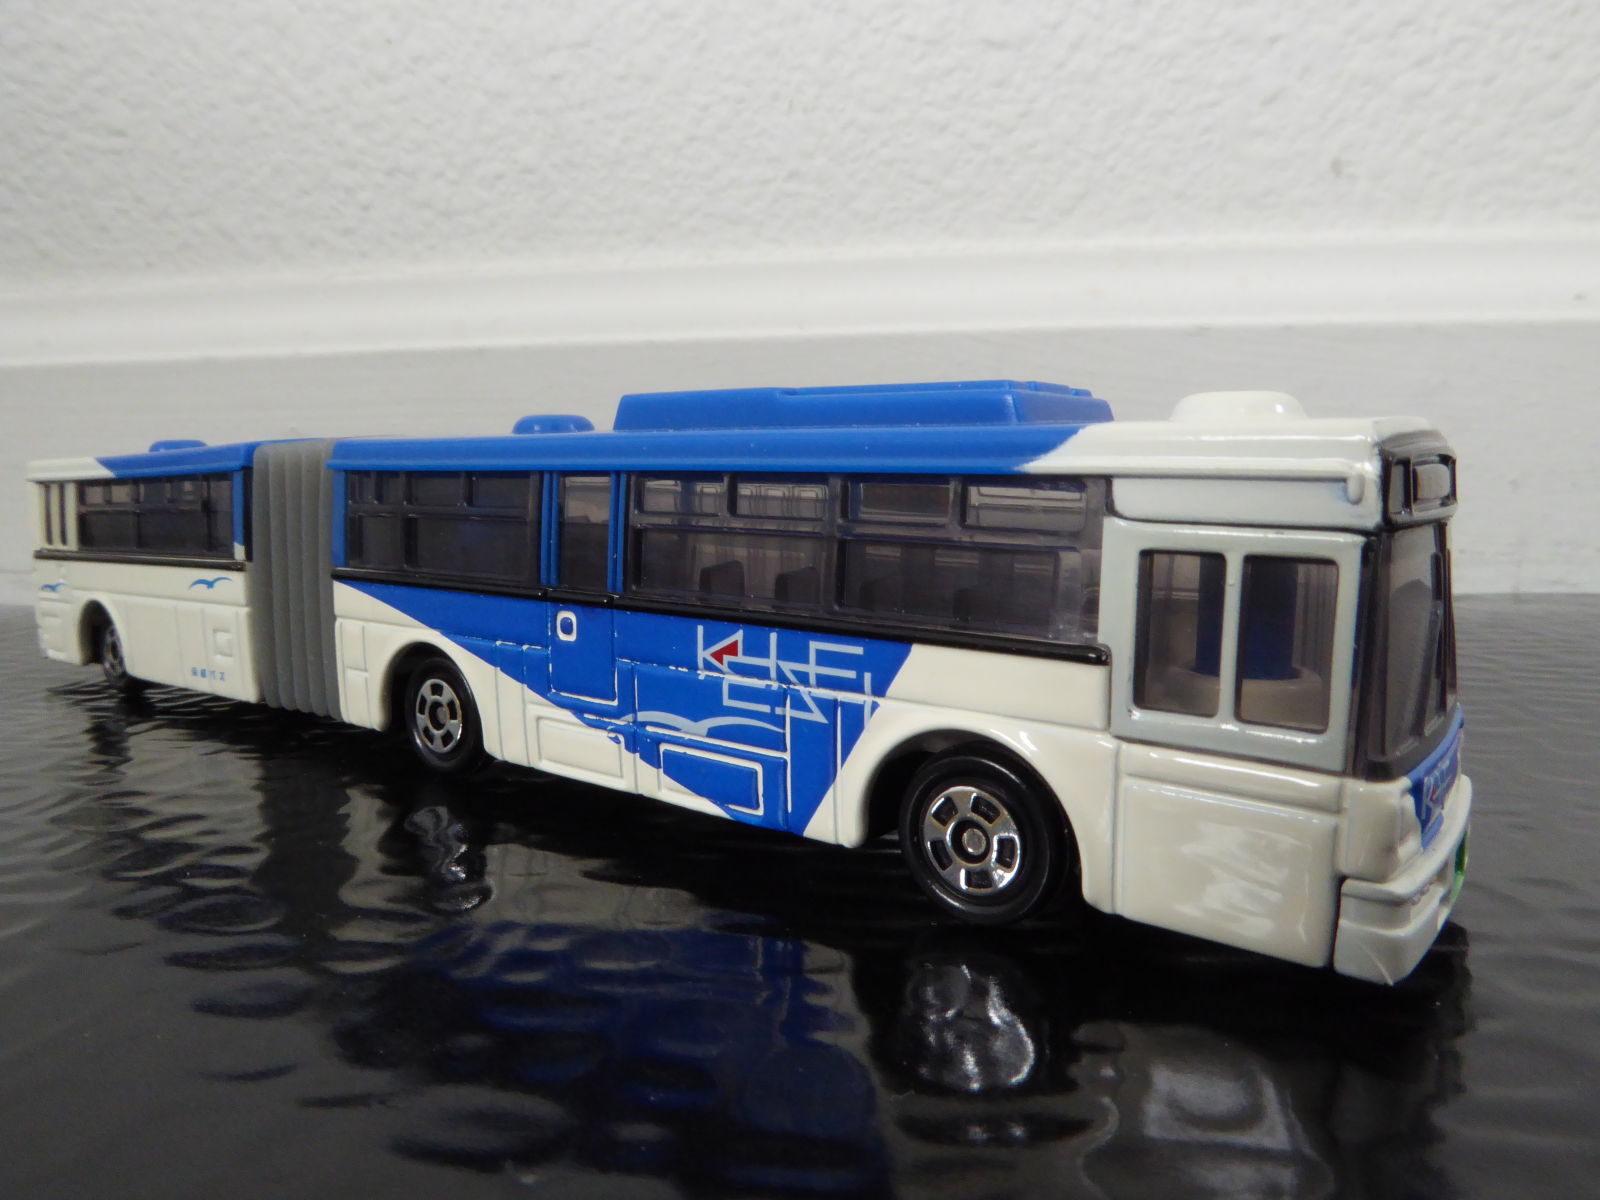 Illustration for article titled Hot Sixty 4th: Tomica #134 Keisei Articulated Bus